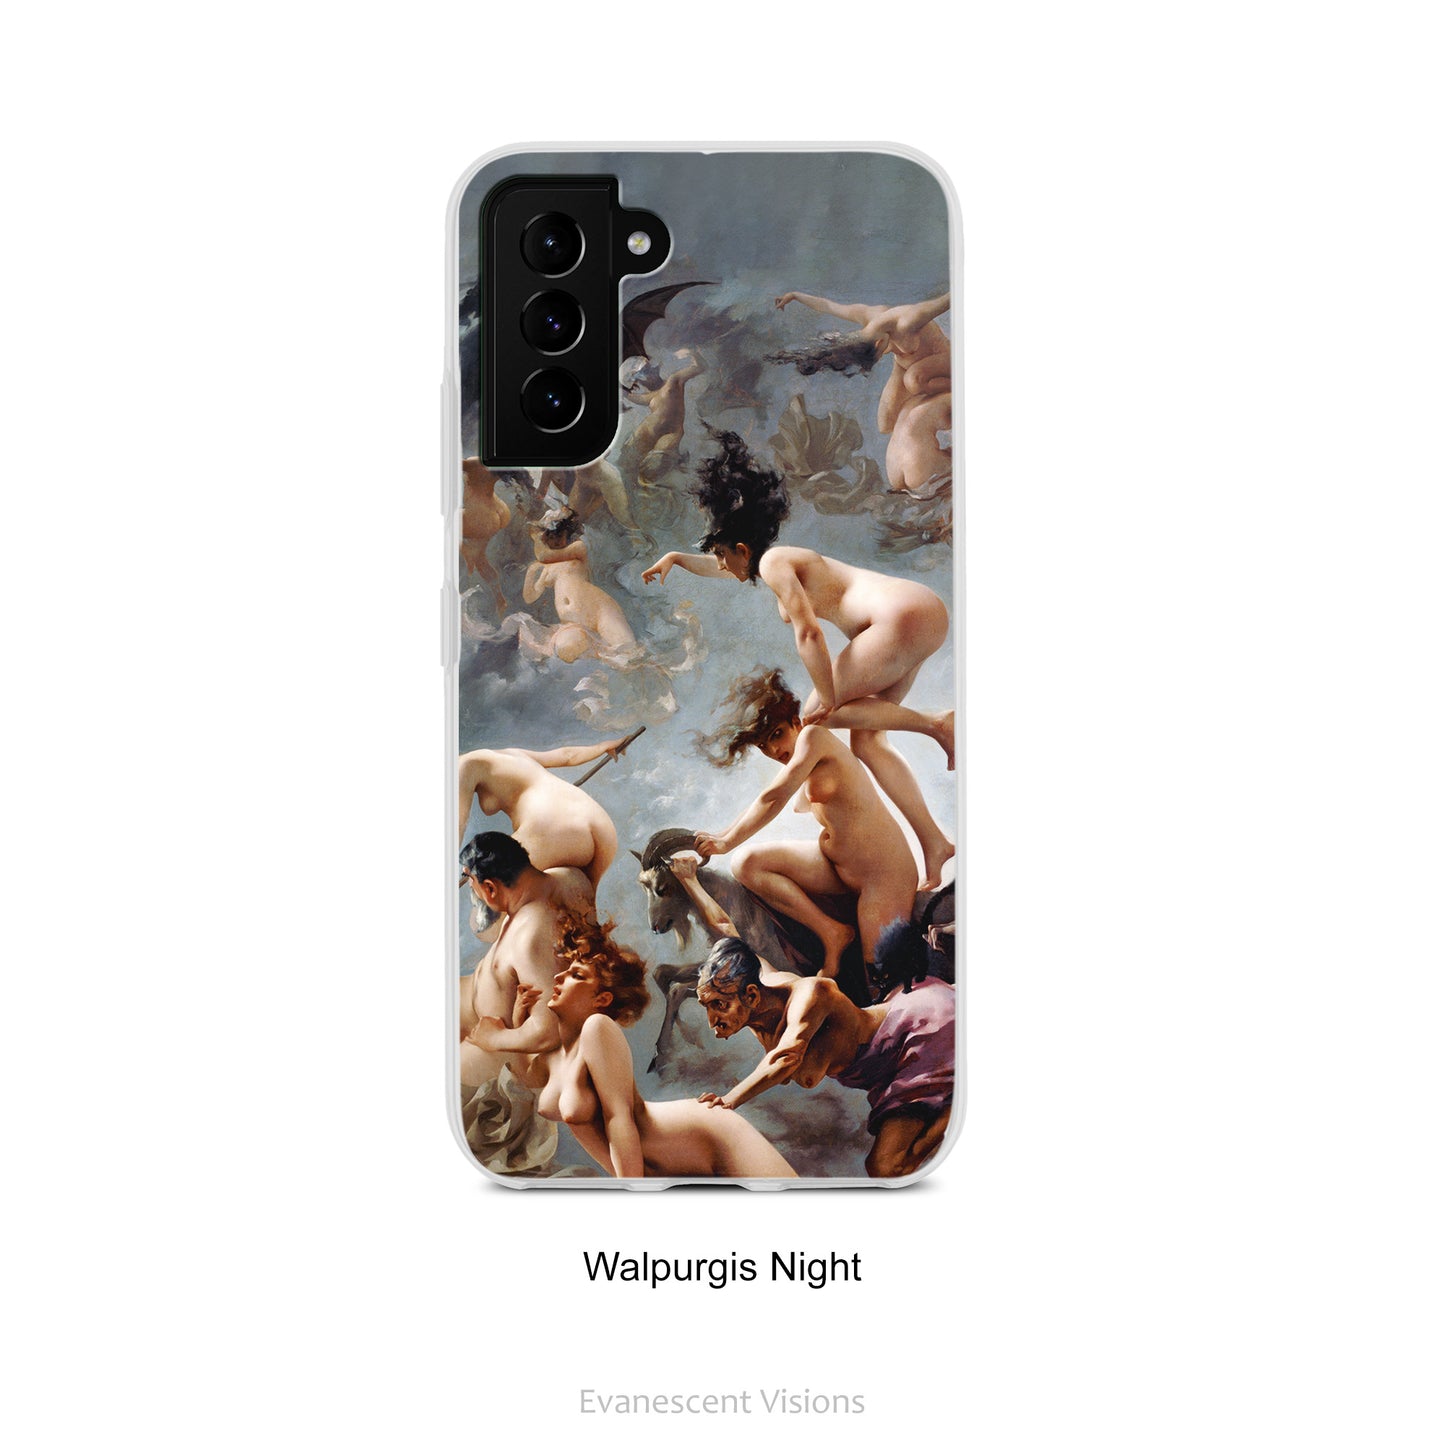 Witches Art Phone Cases for Samsung Phones, Halloween Art